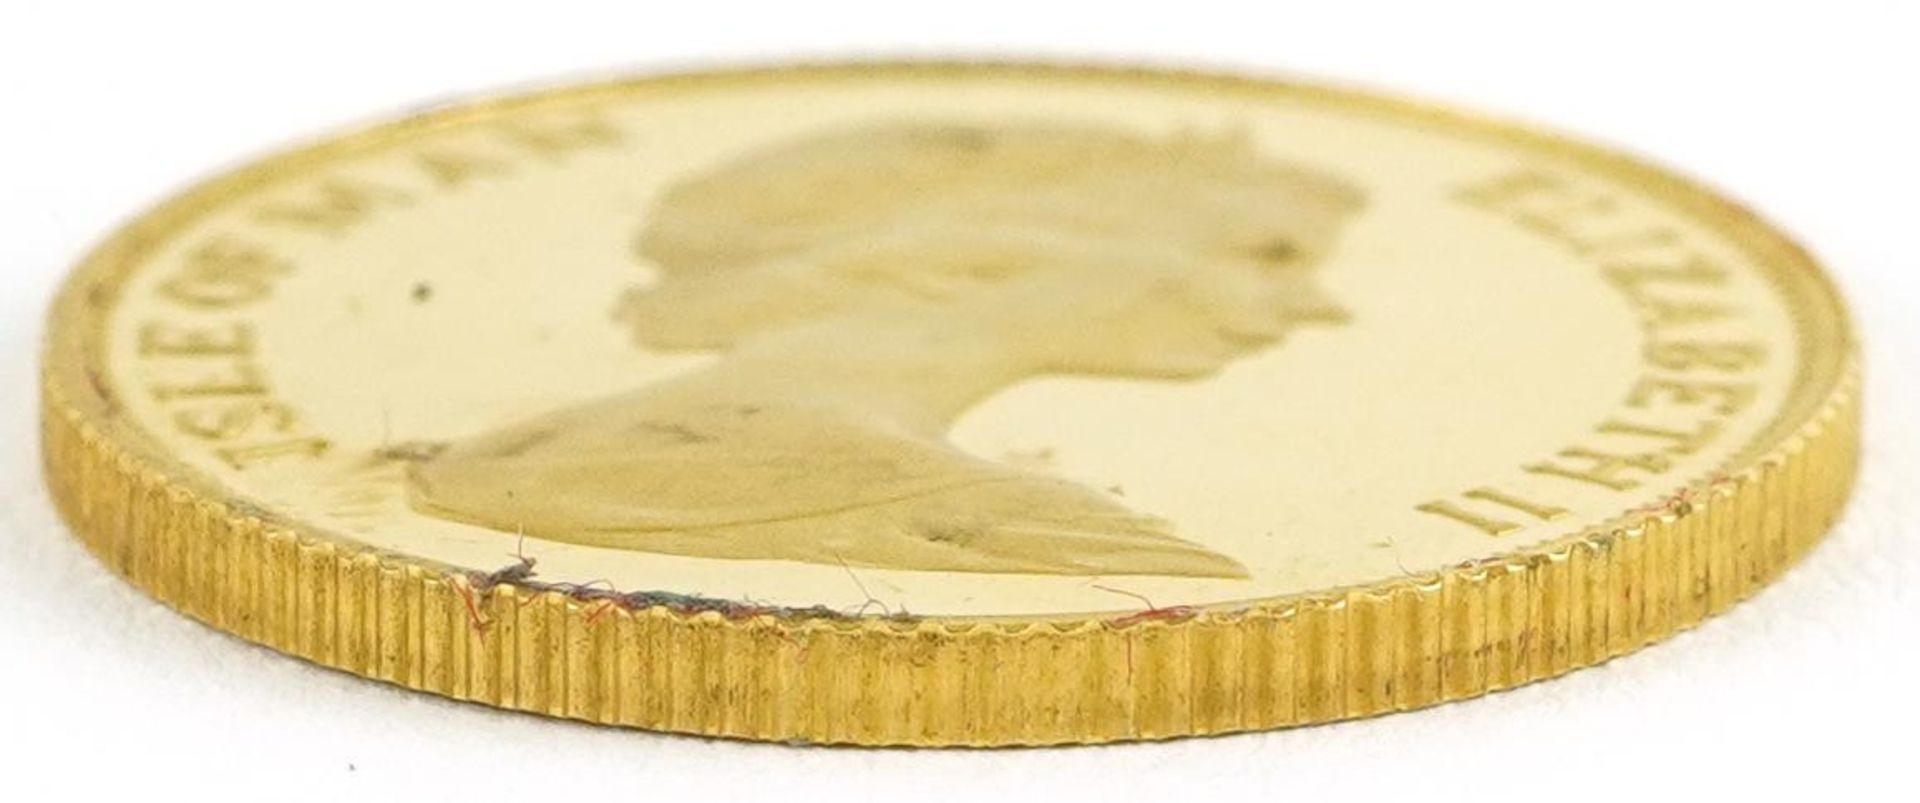 Elizabeth II Isle of Man 1983 Manx gold proof sovereign housed in a Pobjoy Mint book design case - Image 3 of 4